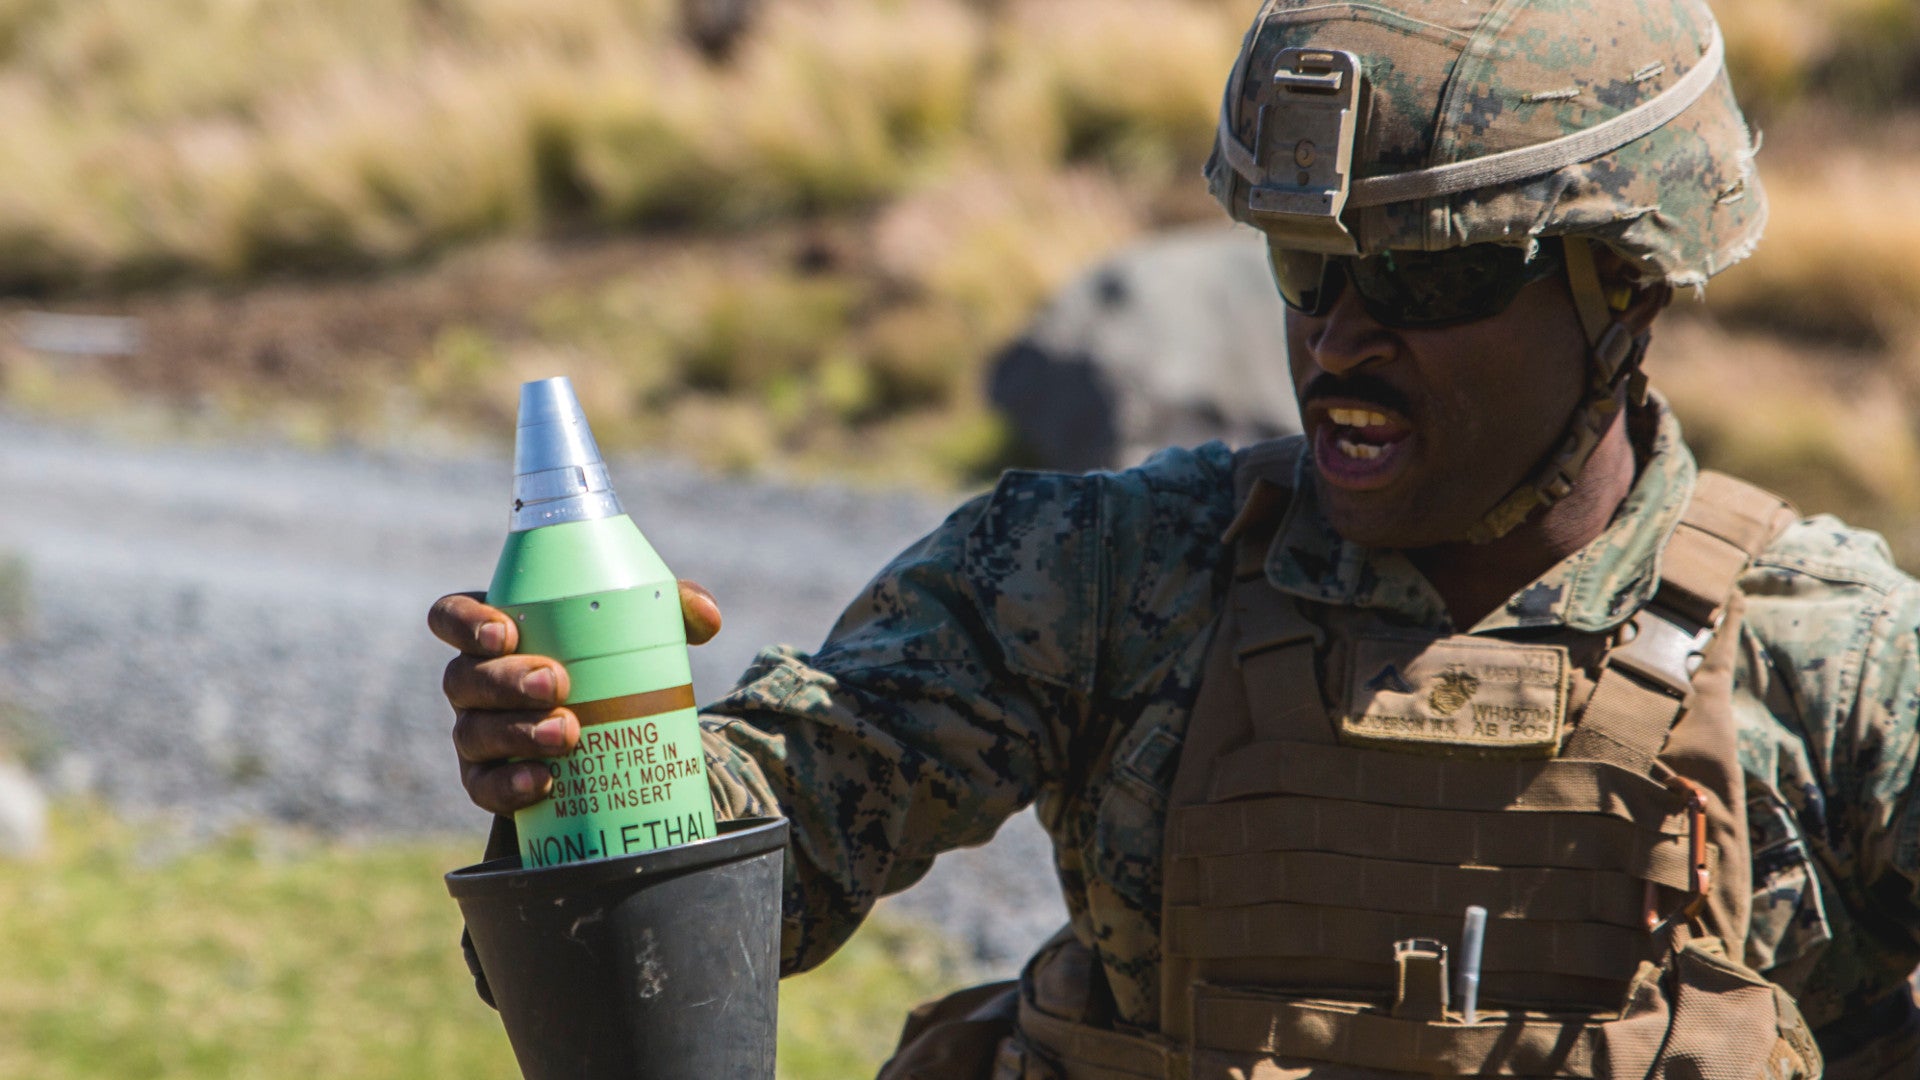 Marines Conduct First Field Test Of ‘Non-Lethal’ Mortar Rounds Full of Flash-Bangs